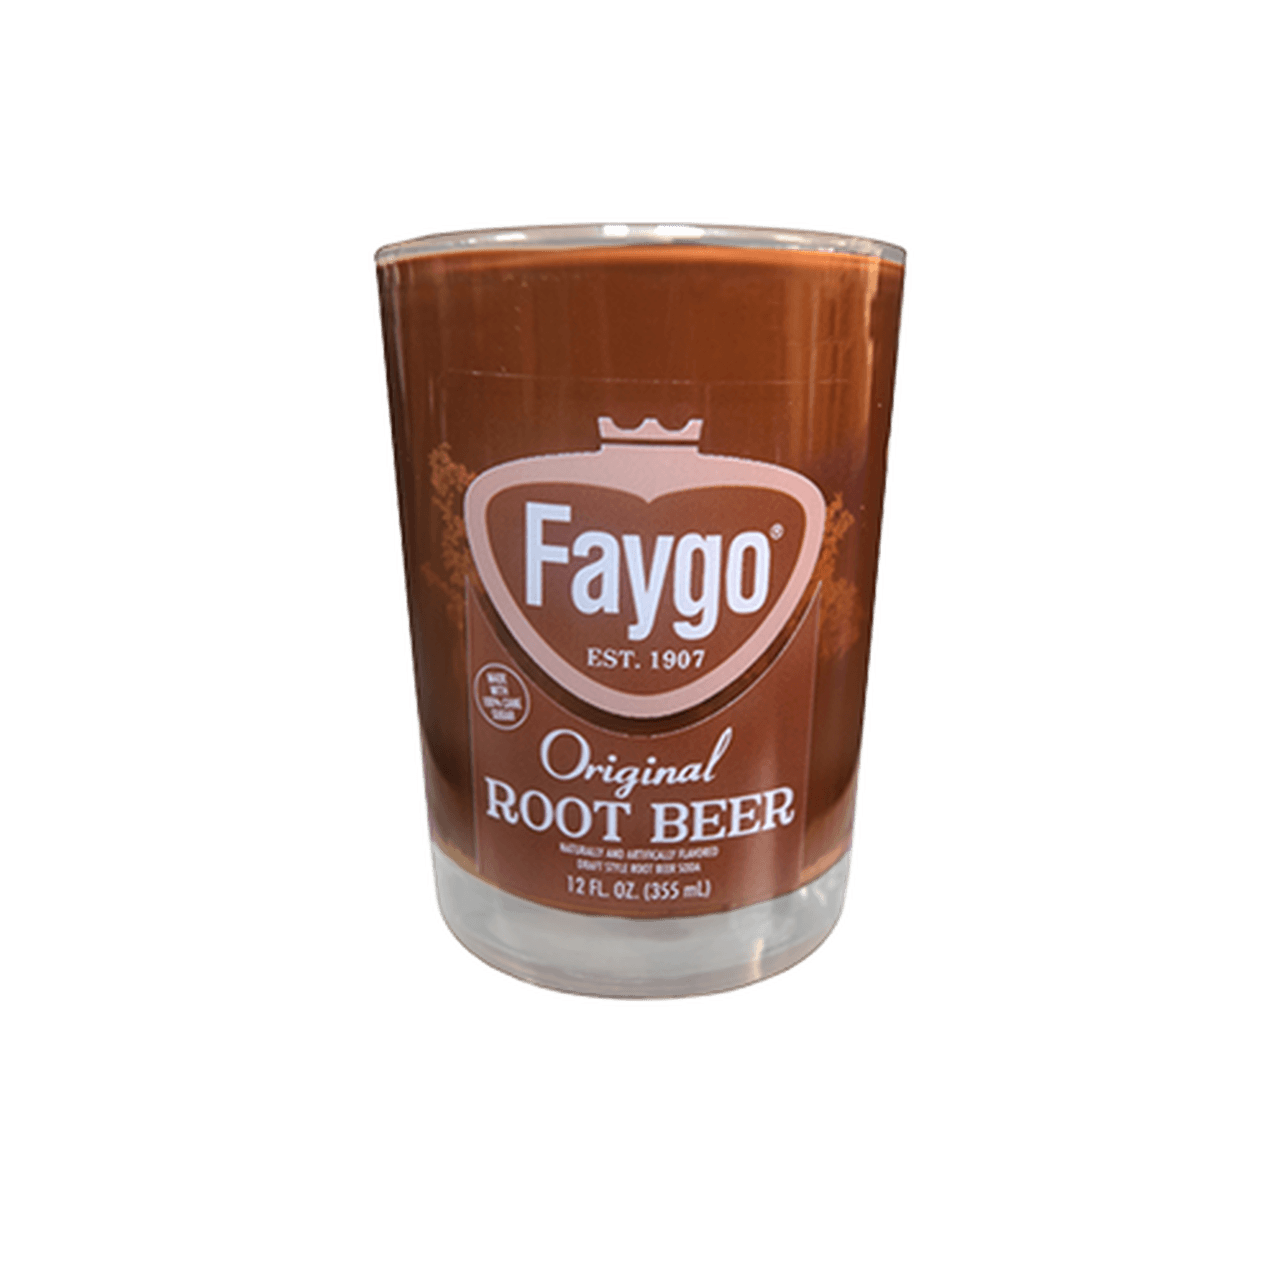 Faygo Logo - Faygo Root Beer Scented 8 oz. Soy Candle